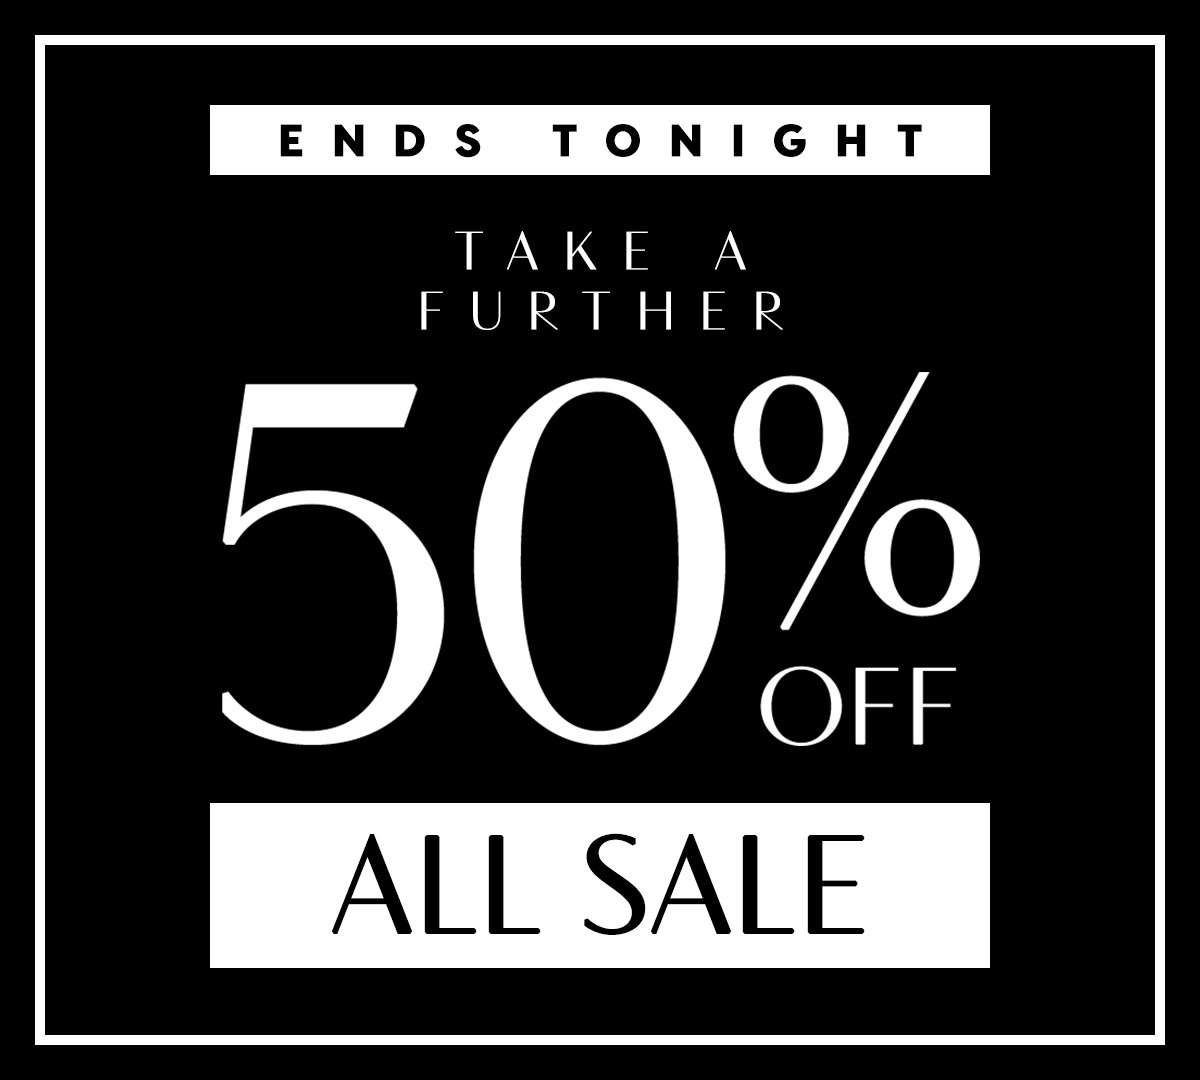 Ends Tonight. Take a further 50% off sale